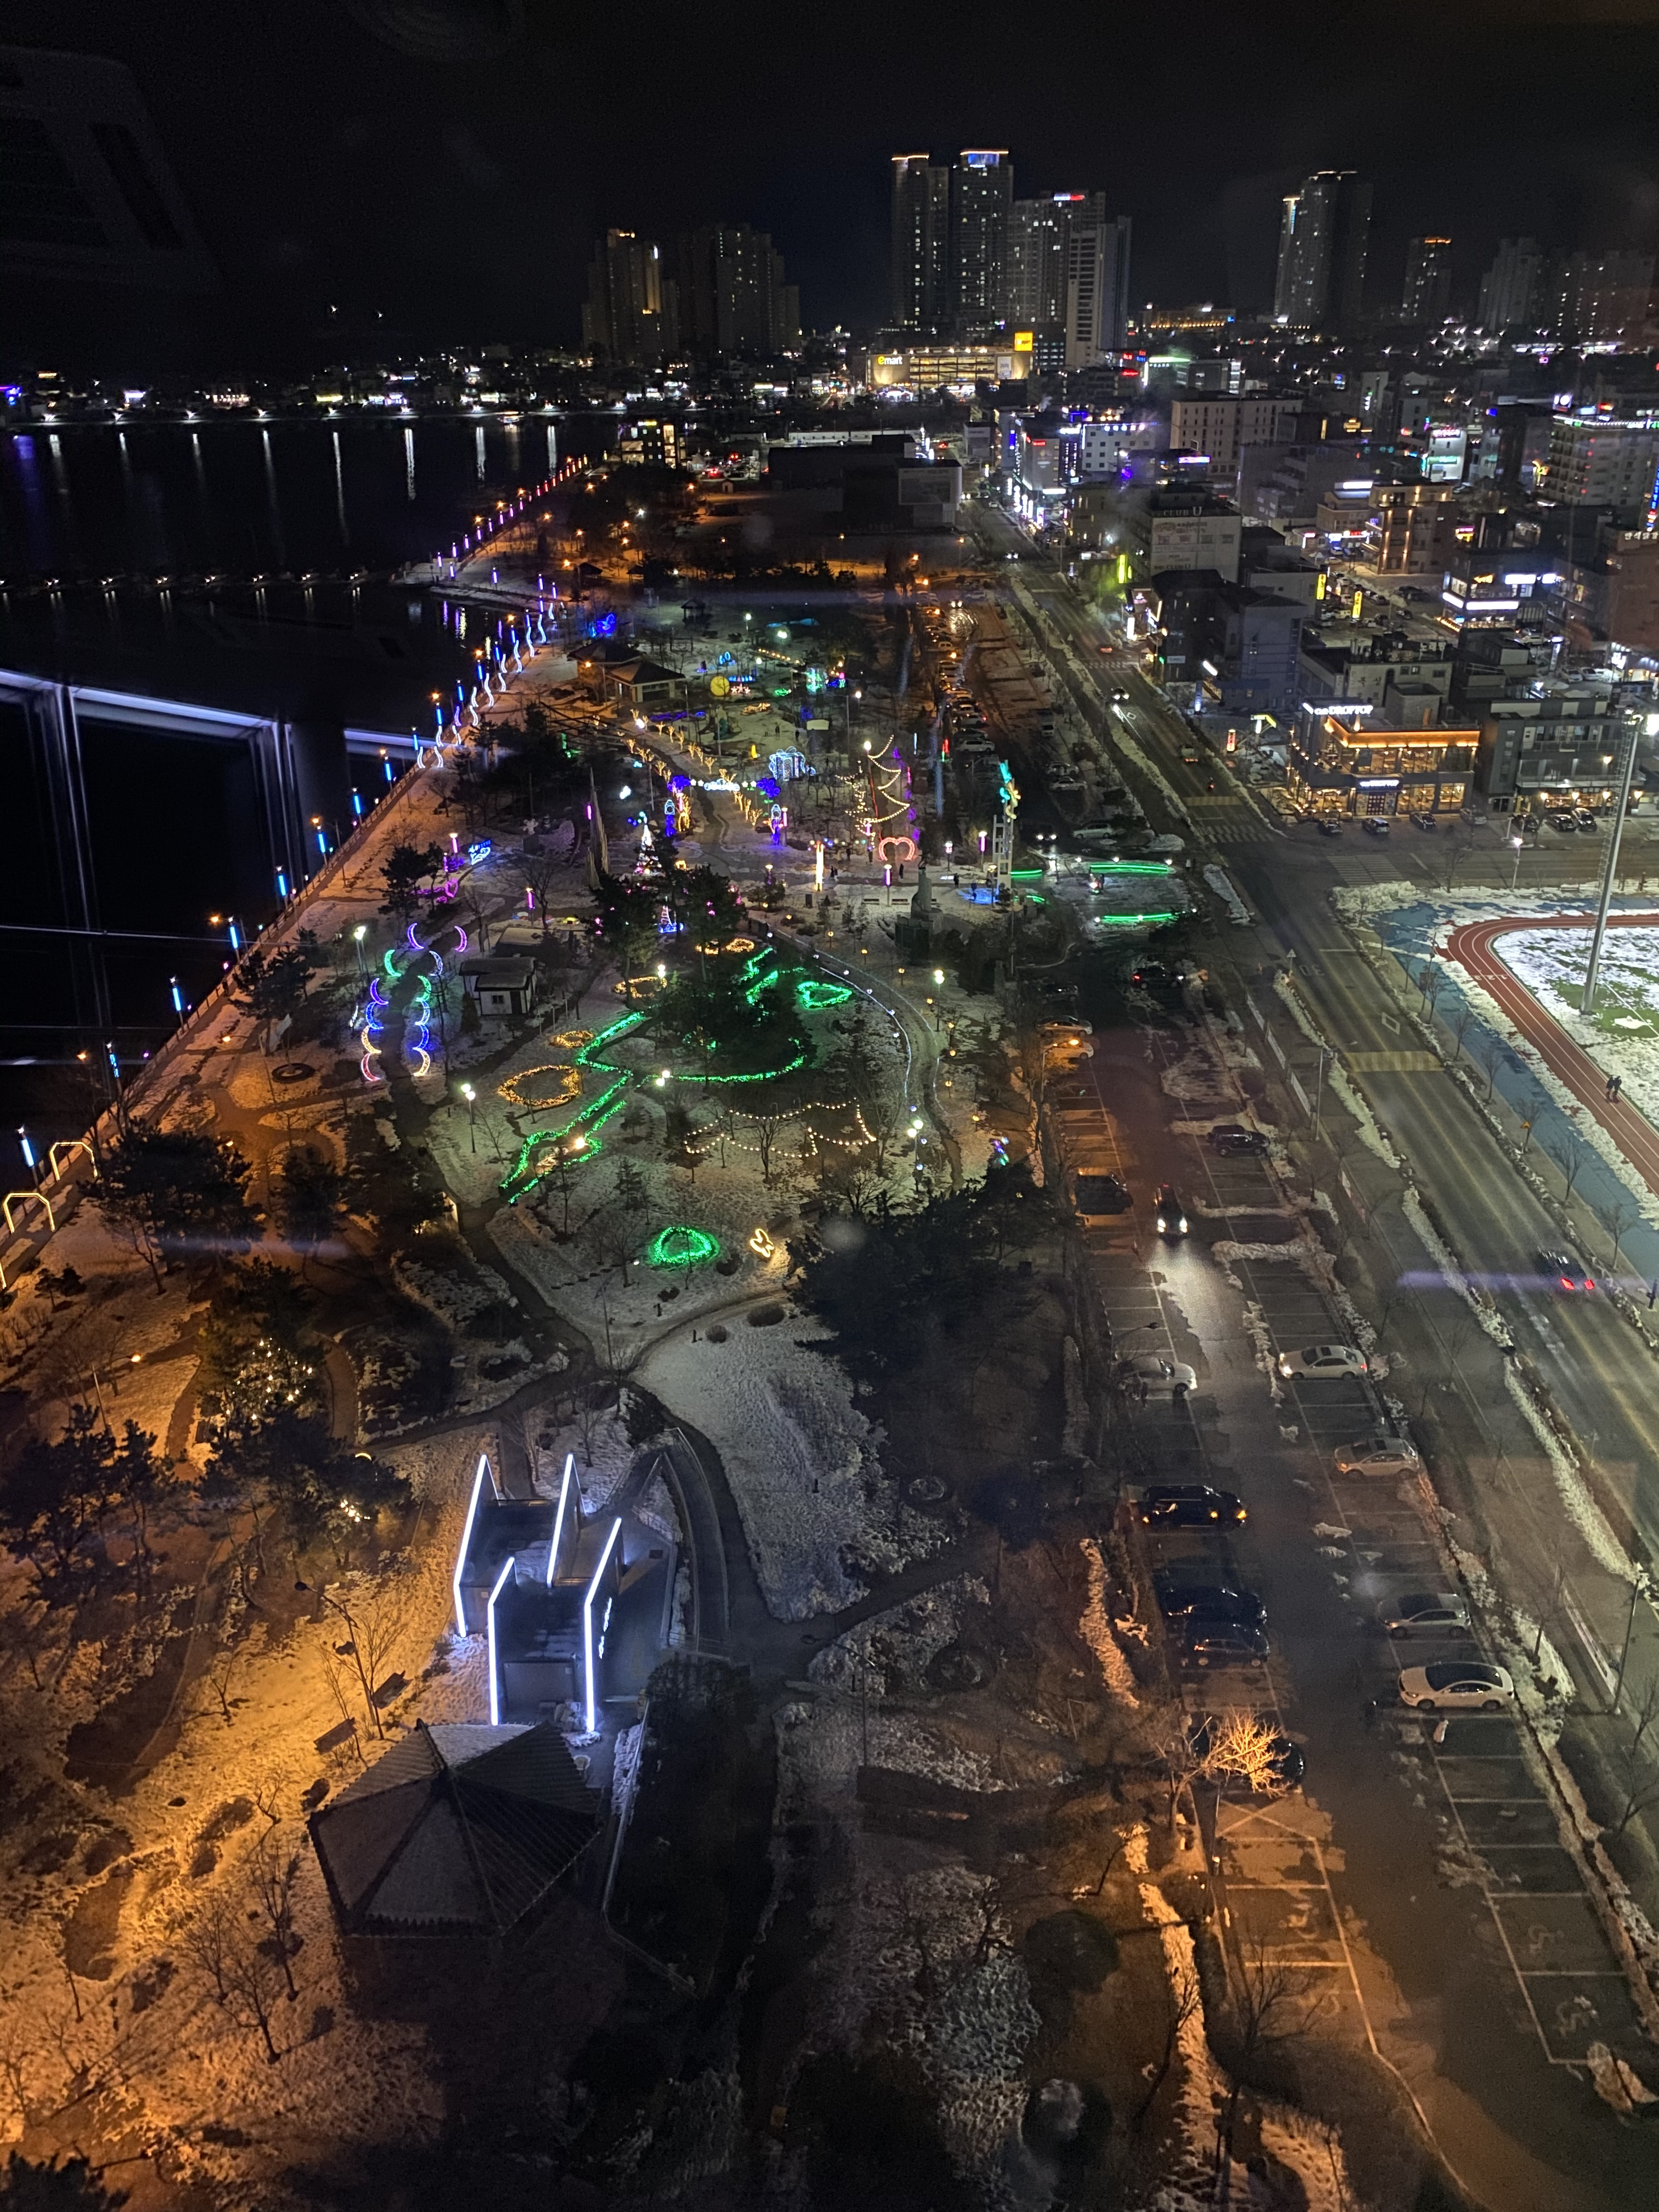 "Night View From Expo Tower" by Amy Chen